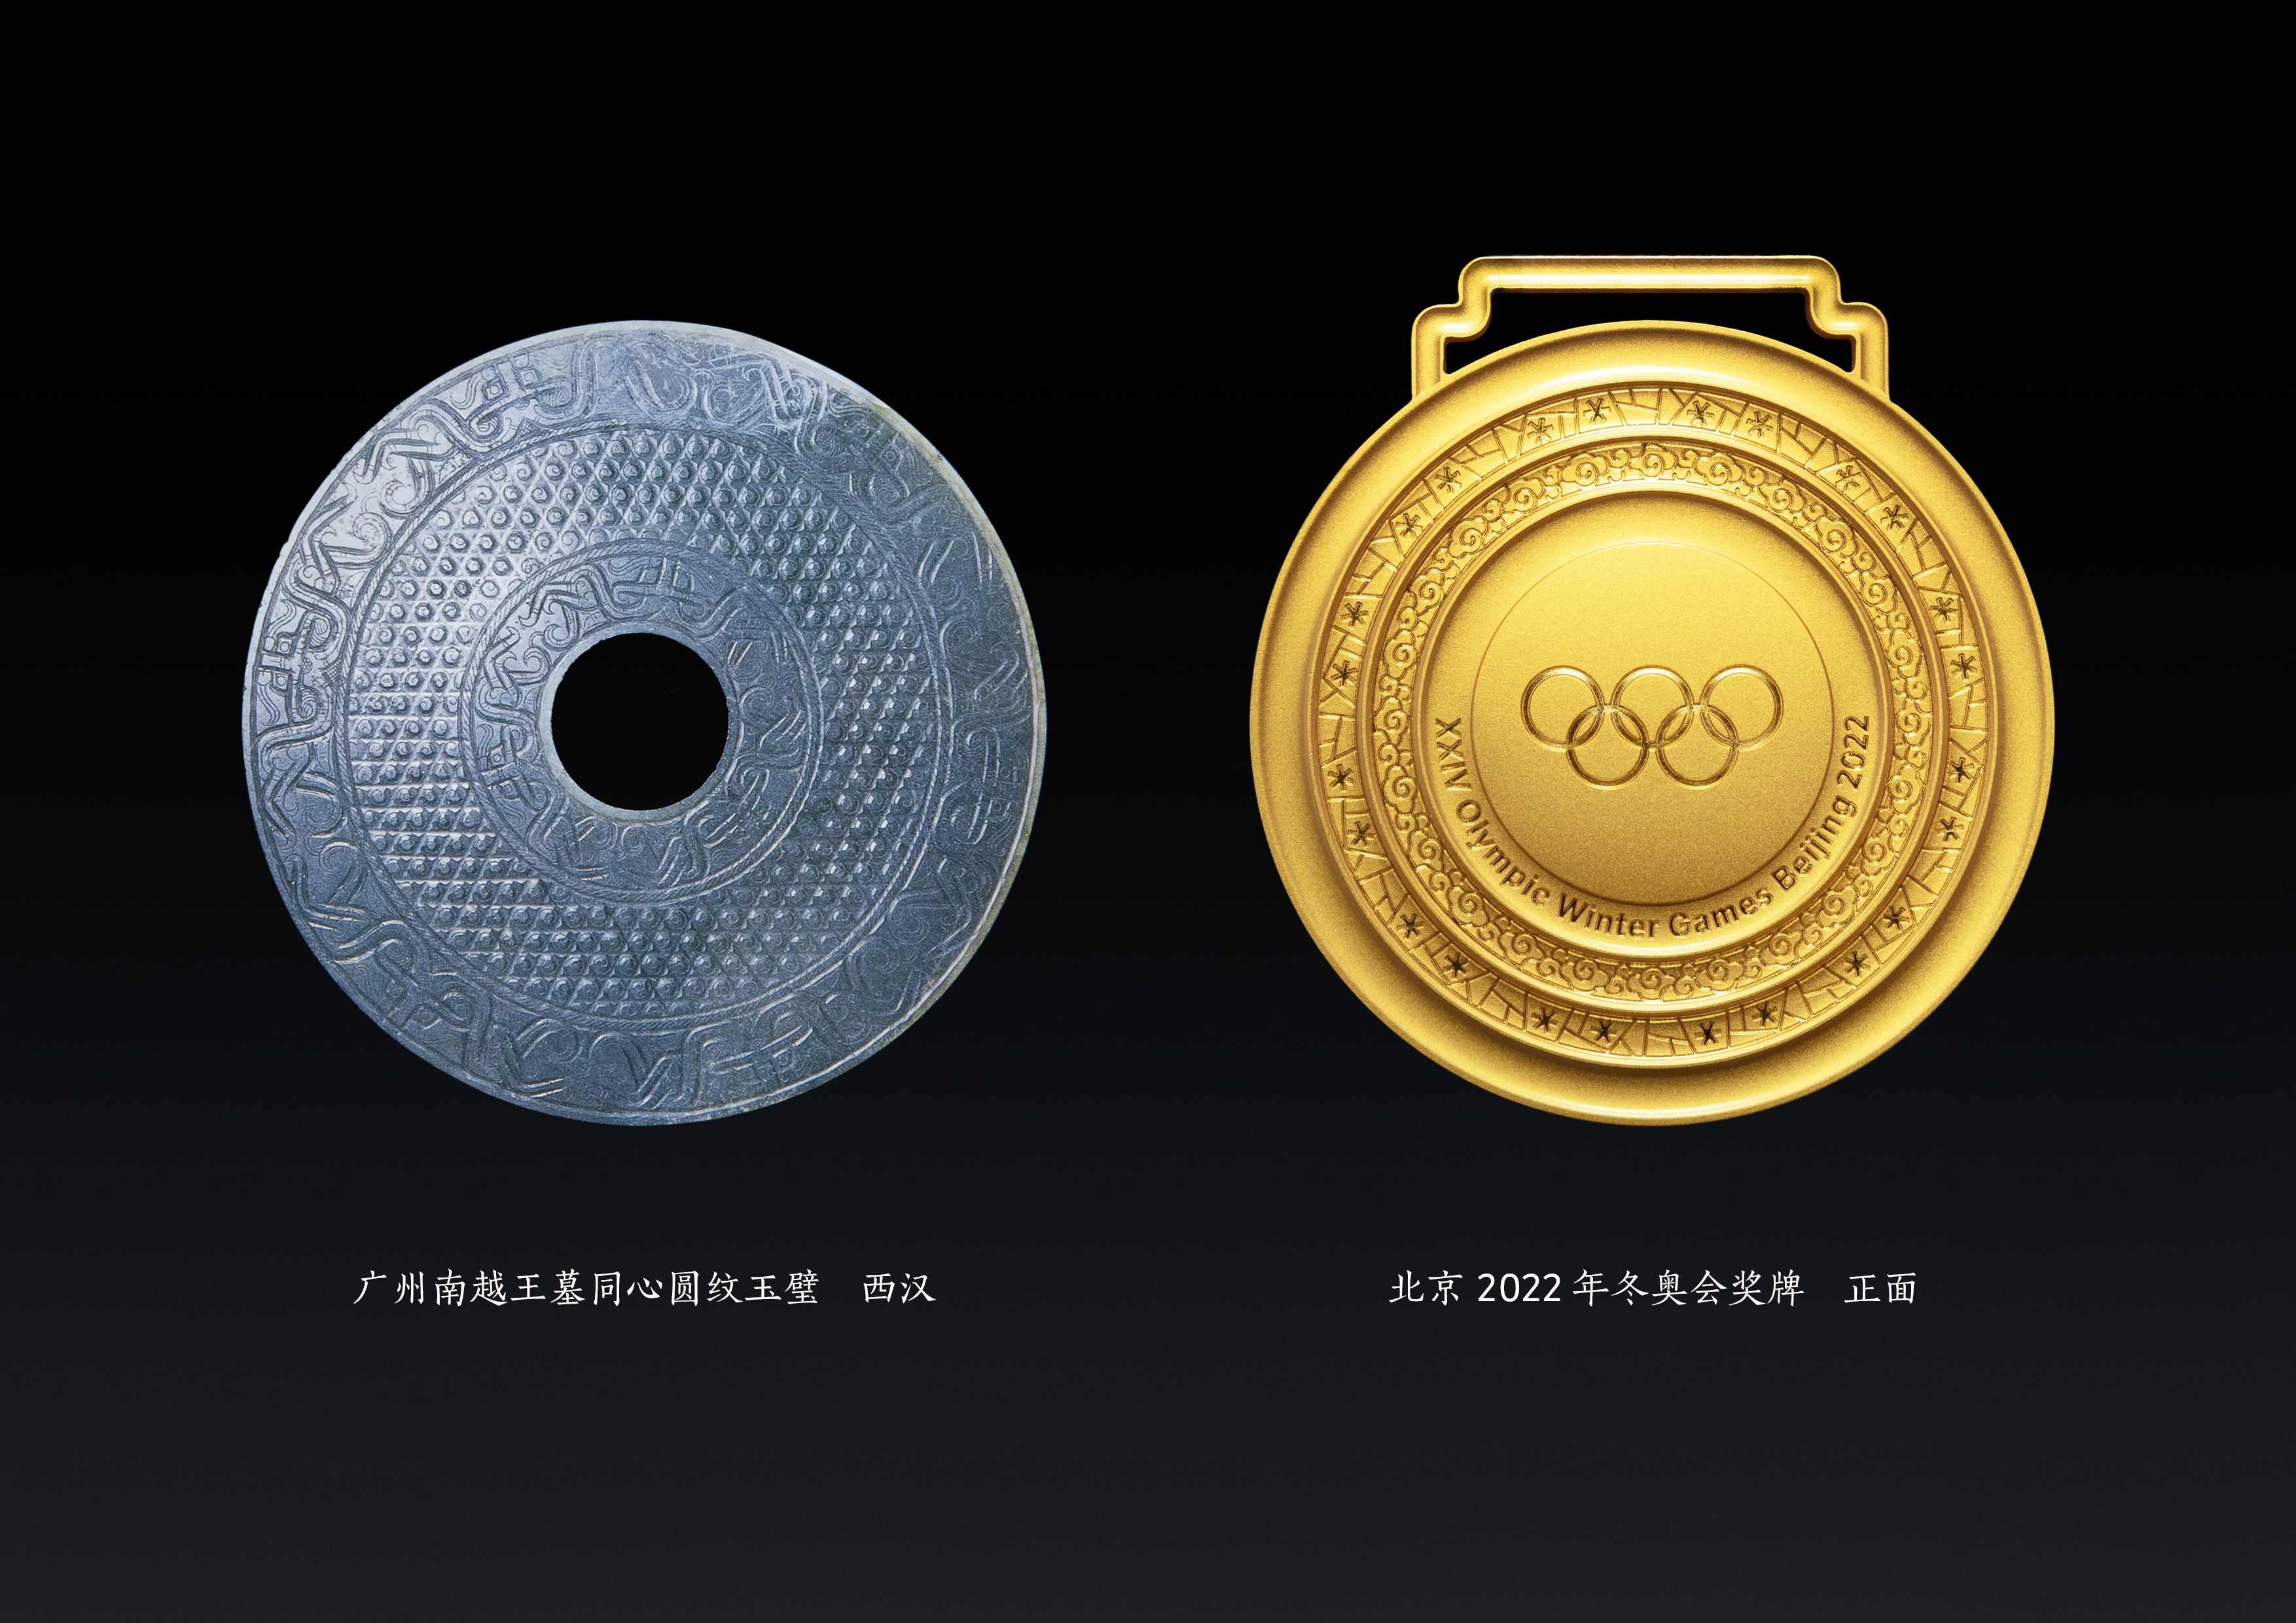 Tokyo 2020 Paralympic Medals - Photos & Medal Design